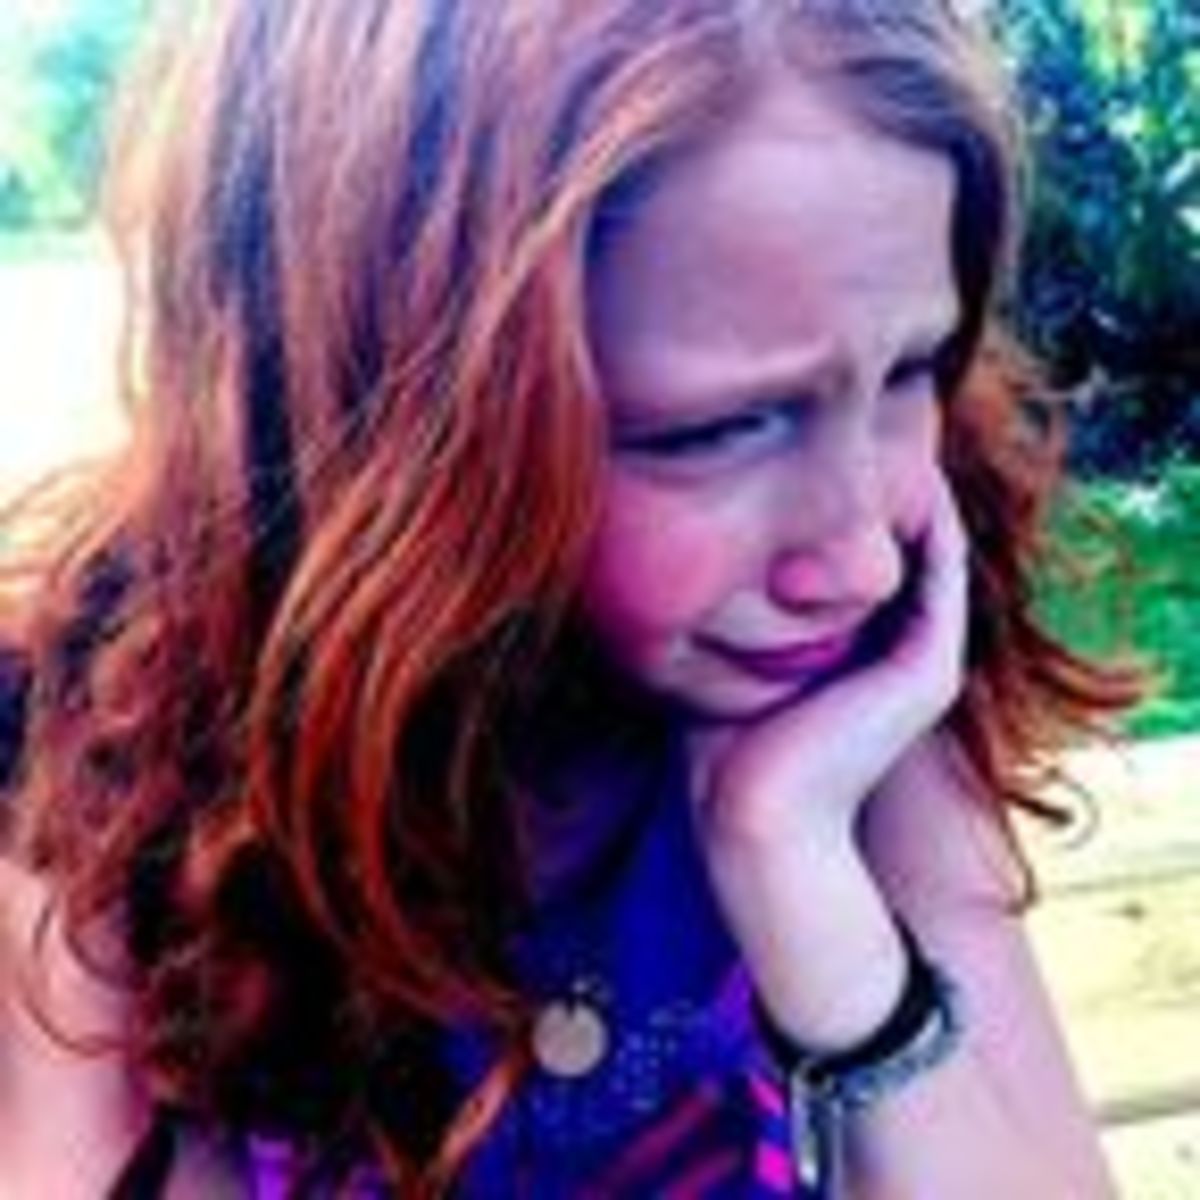 Dad Force Fuck Daughter Crying - Why Are More Young Girls Killing Themselves? | Psychology Today